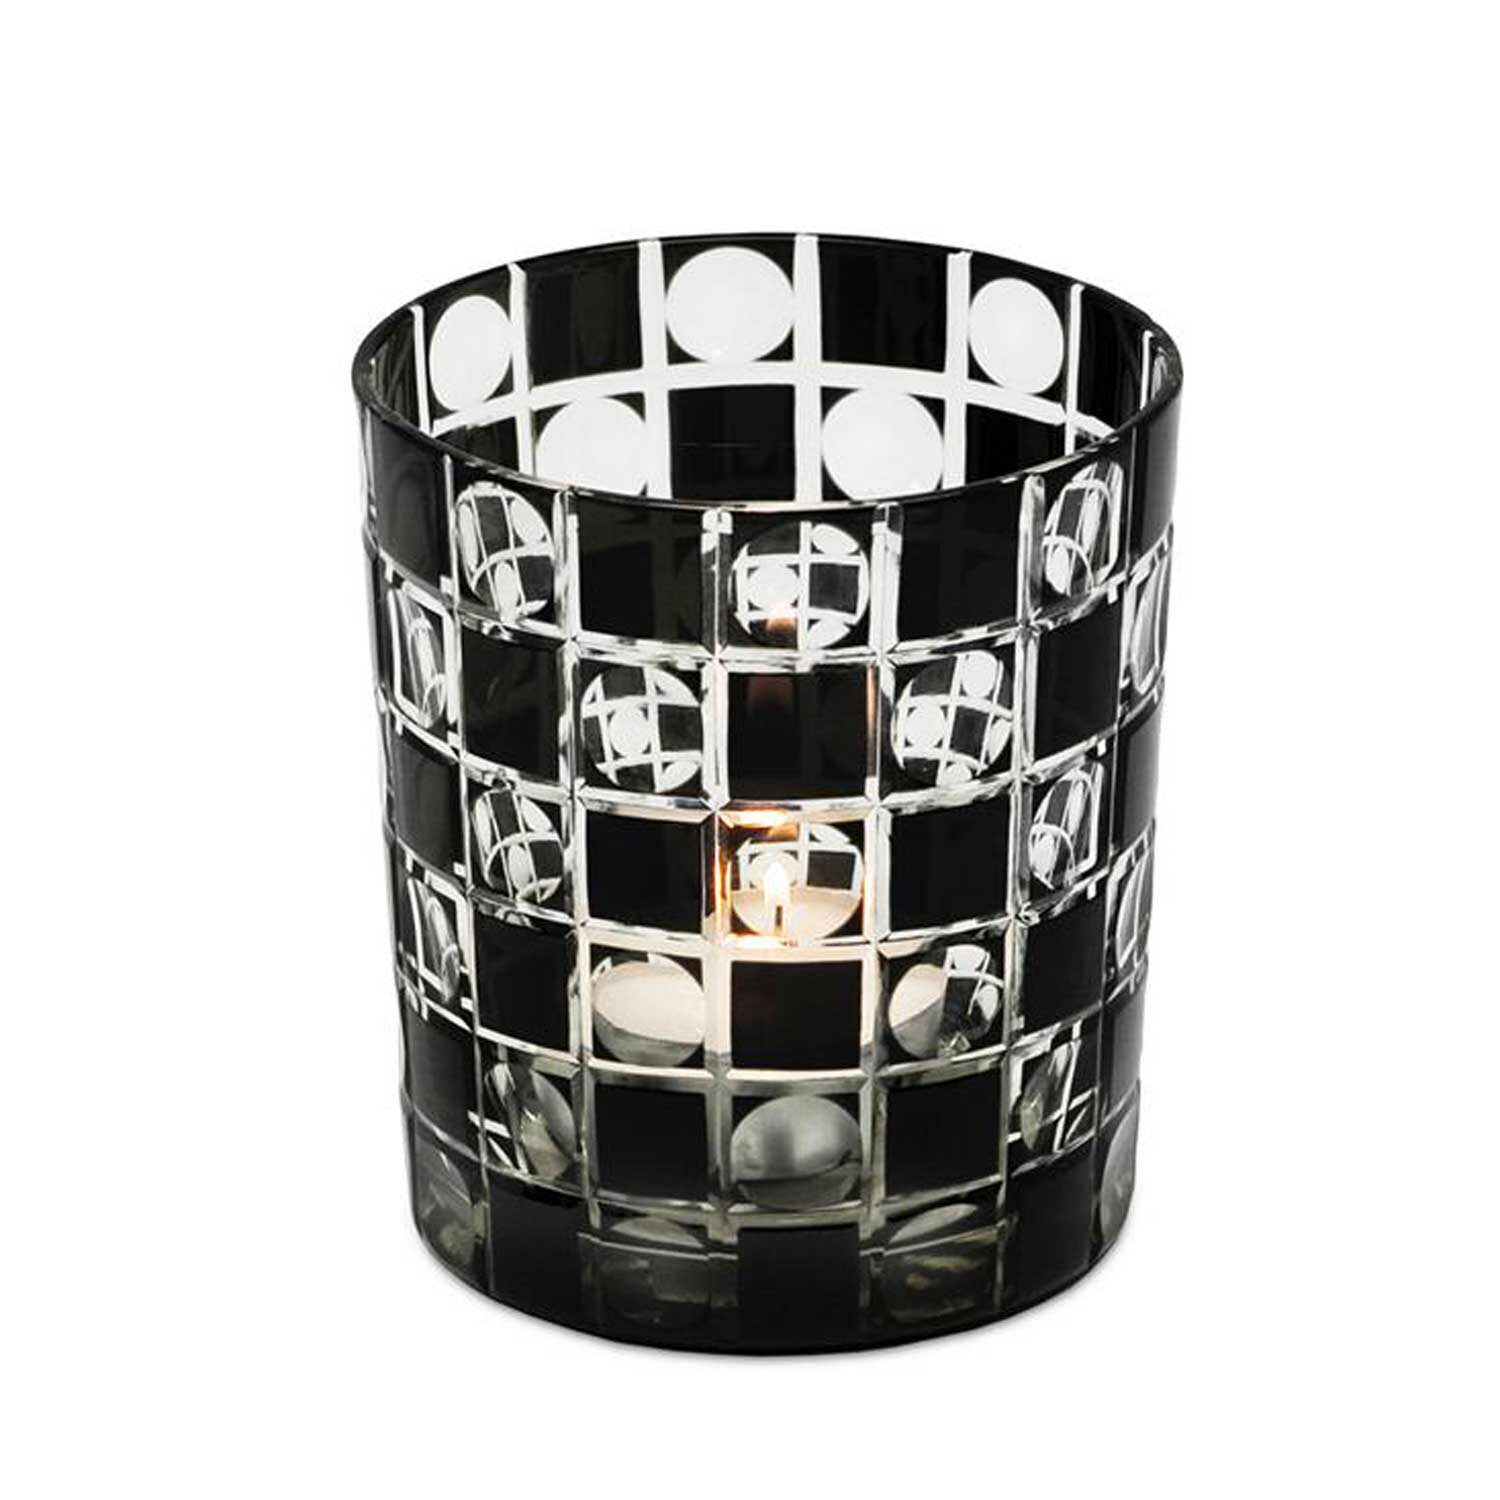 DIEGO crystal glass (checkerboard pattern) black set of 4